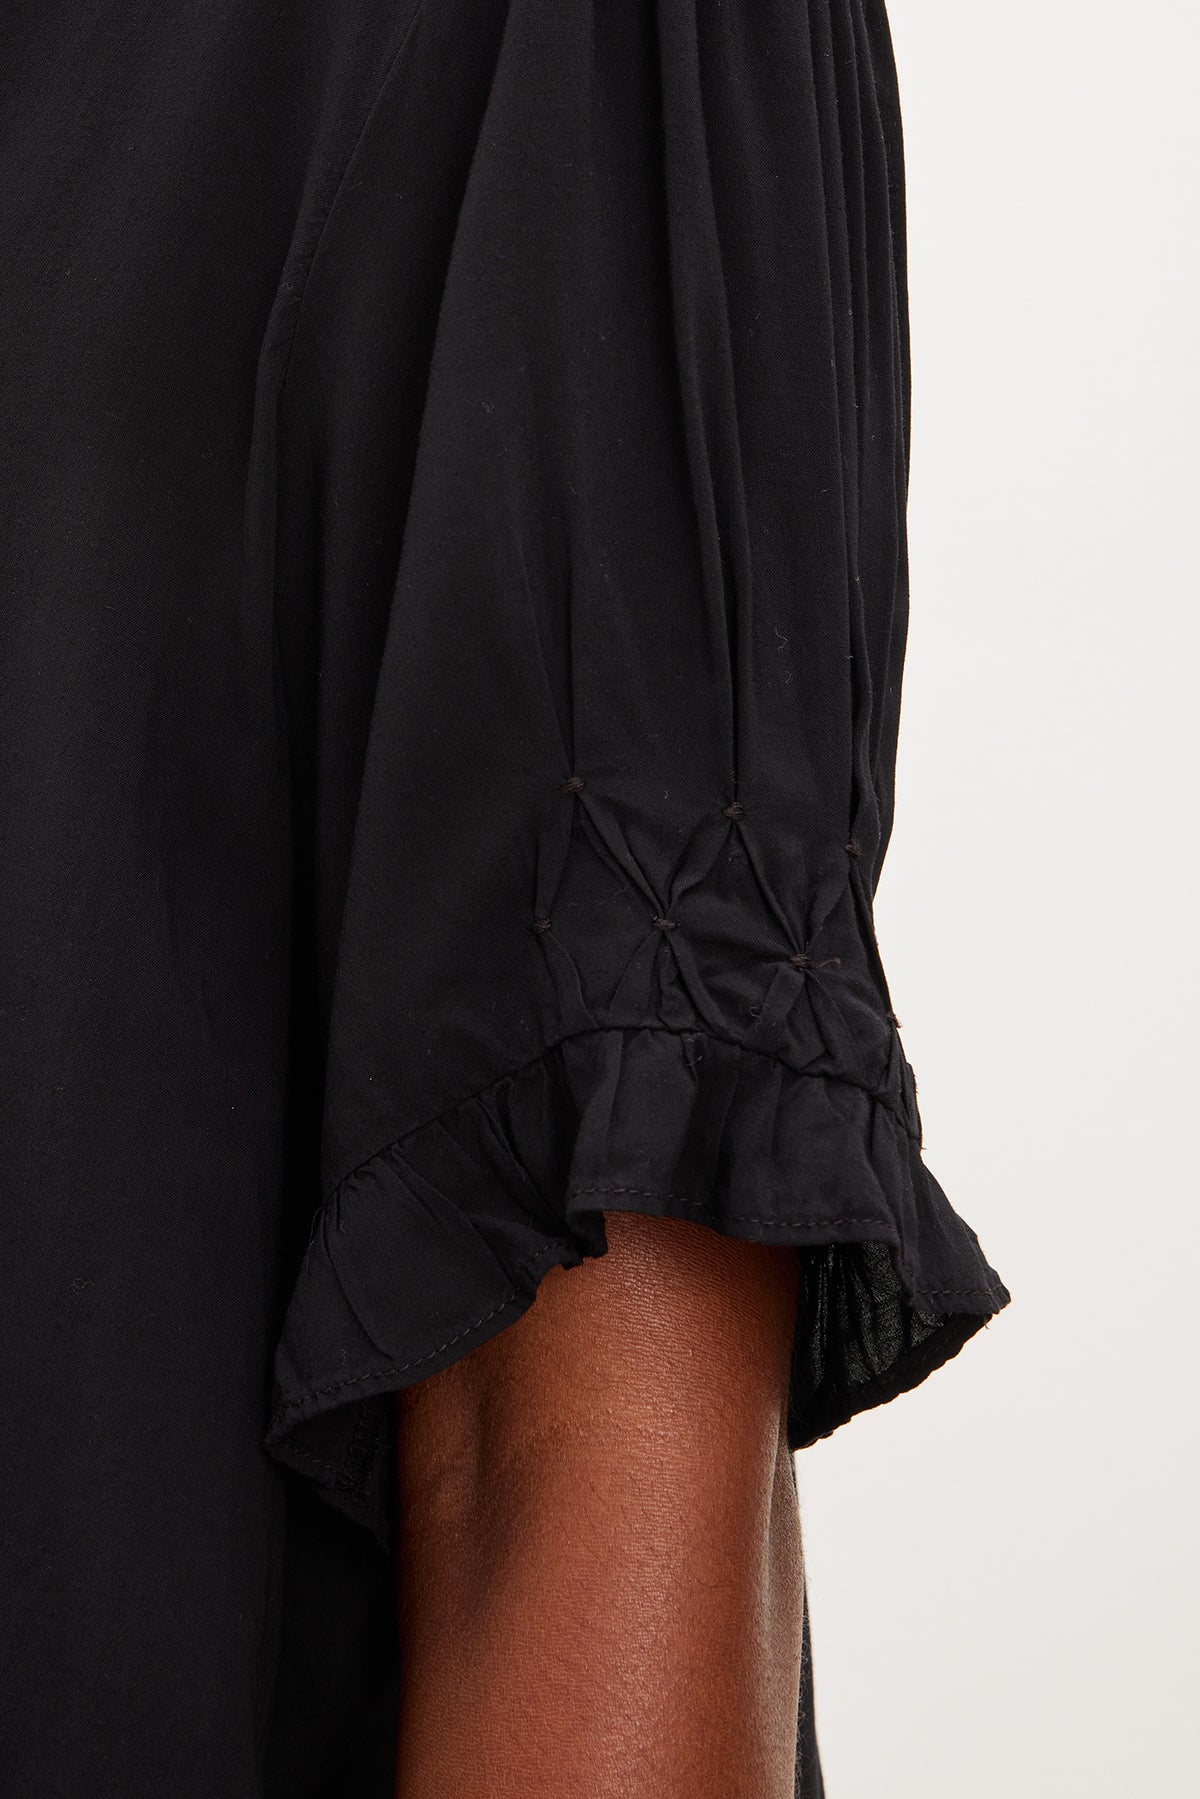 A close up of a woman wearing a Velvet by Graham & Spencer Calissa Split Neck Blouse with ruffled sleeves made from rayon challis.-35955491012801